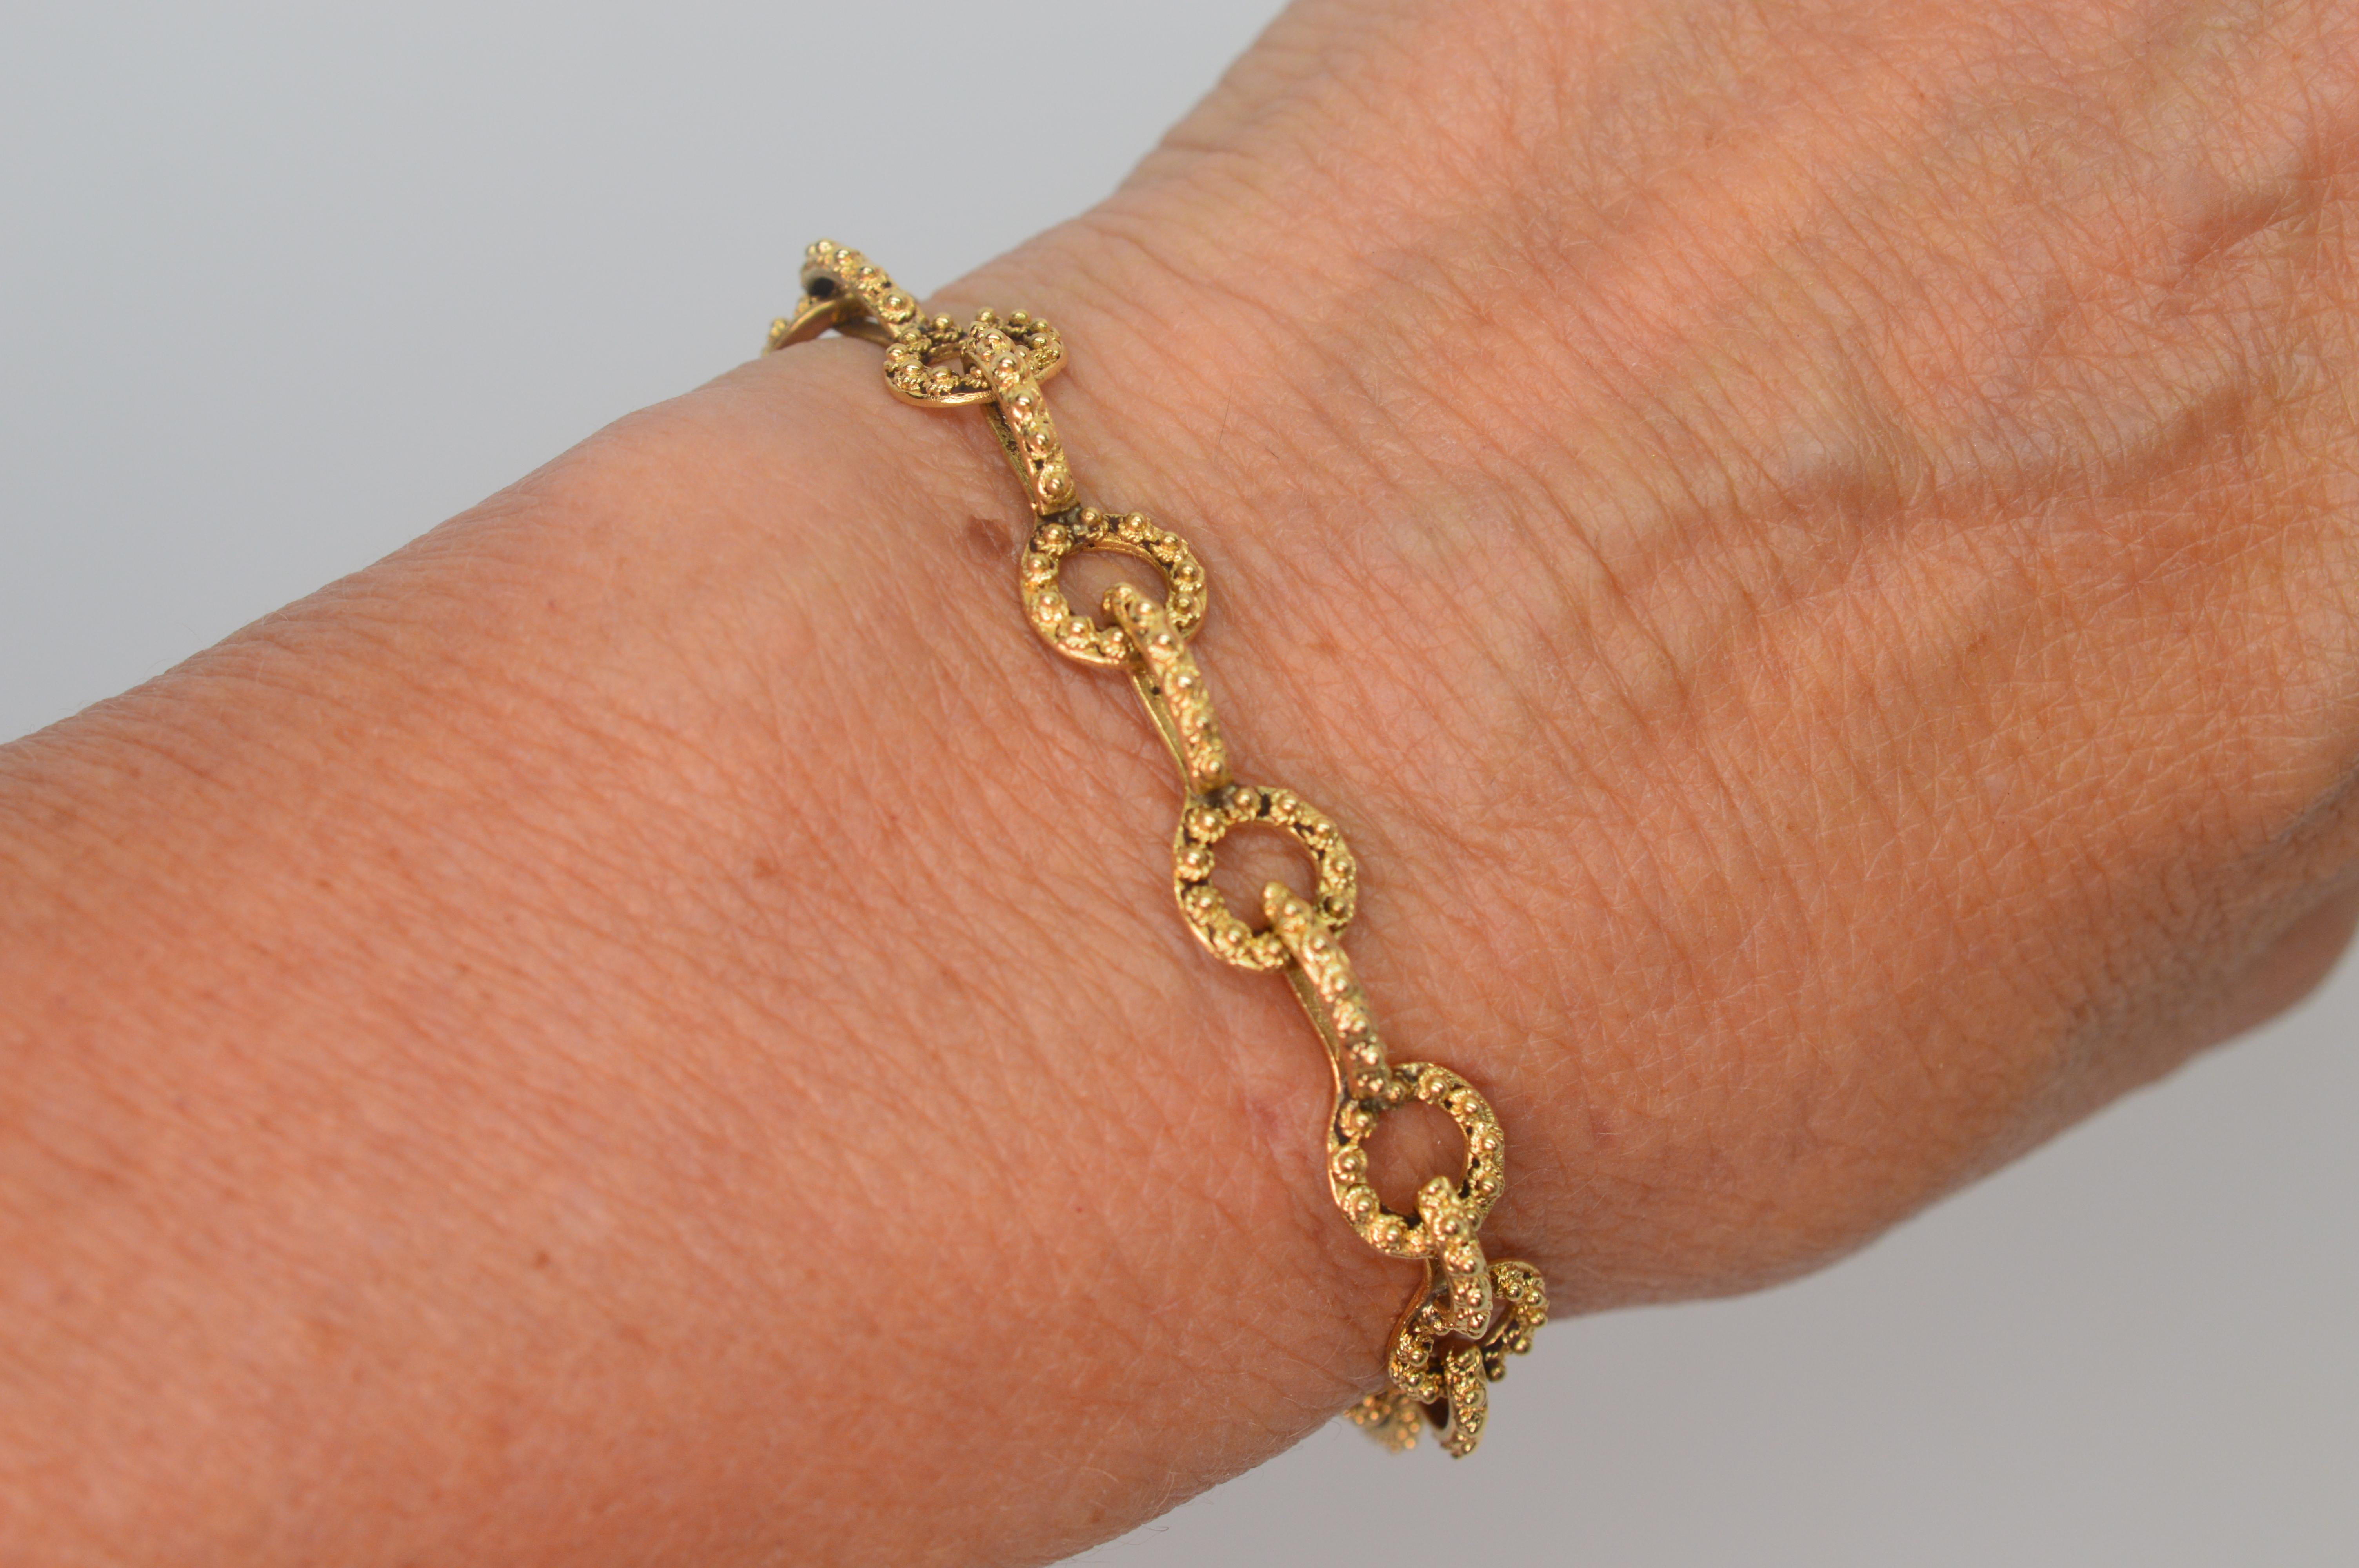 Hand-cast and crafted in fourteen carat yellow gold, this vintage keyhole link bracelet has a bit of an antique patina that gives a true artisan vibe.  
Lightweight and versatile, this 7 inch bracelet can be worn solo or to stack with other pieces